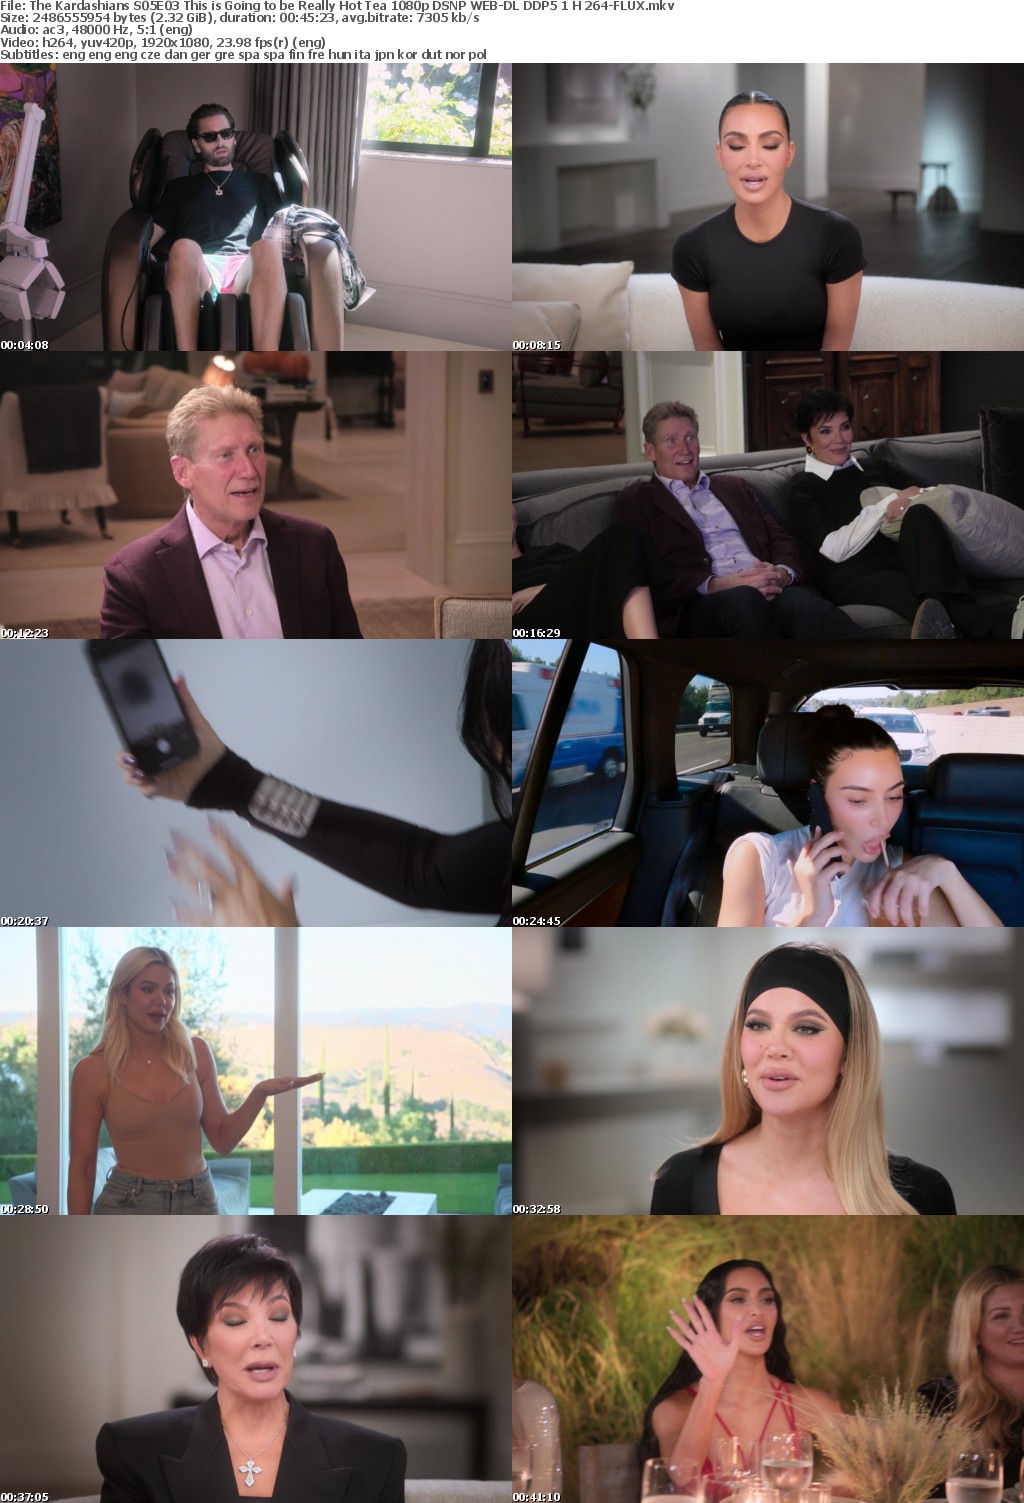 The Kardashians S05E03 This is Going to be Really Hot Tea 1080p DSNP WEB-DL DDP5 1 H 264-FLUX